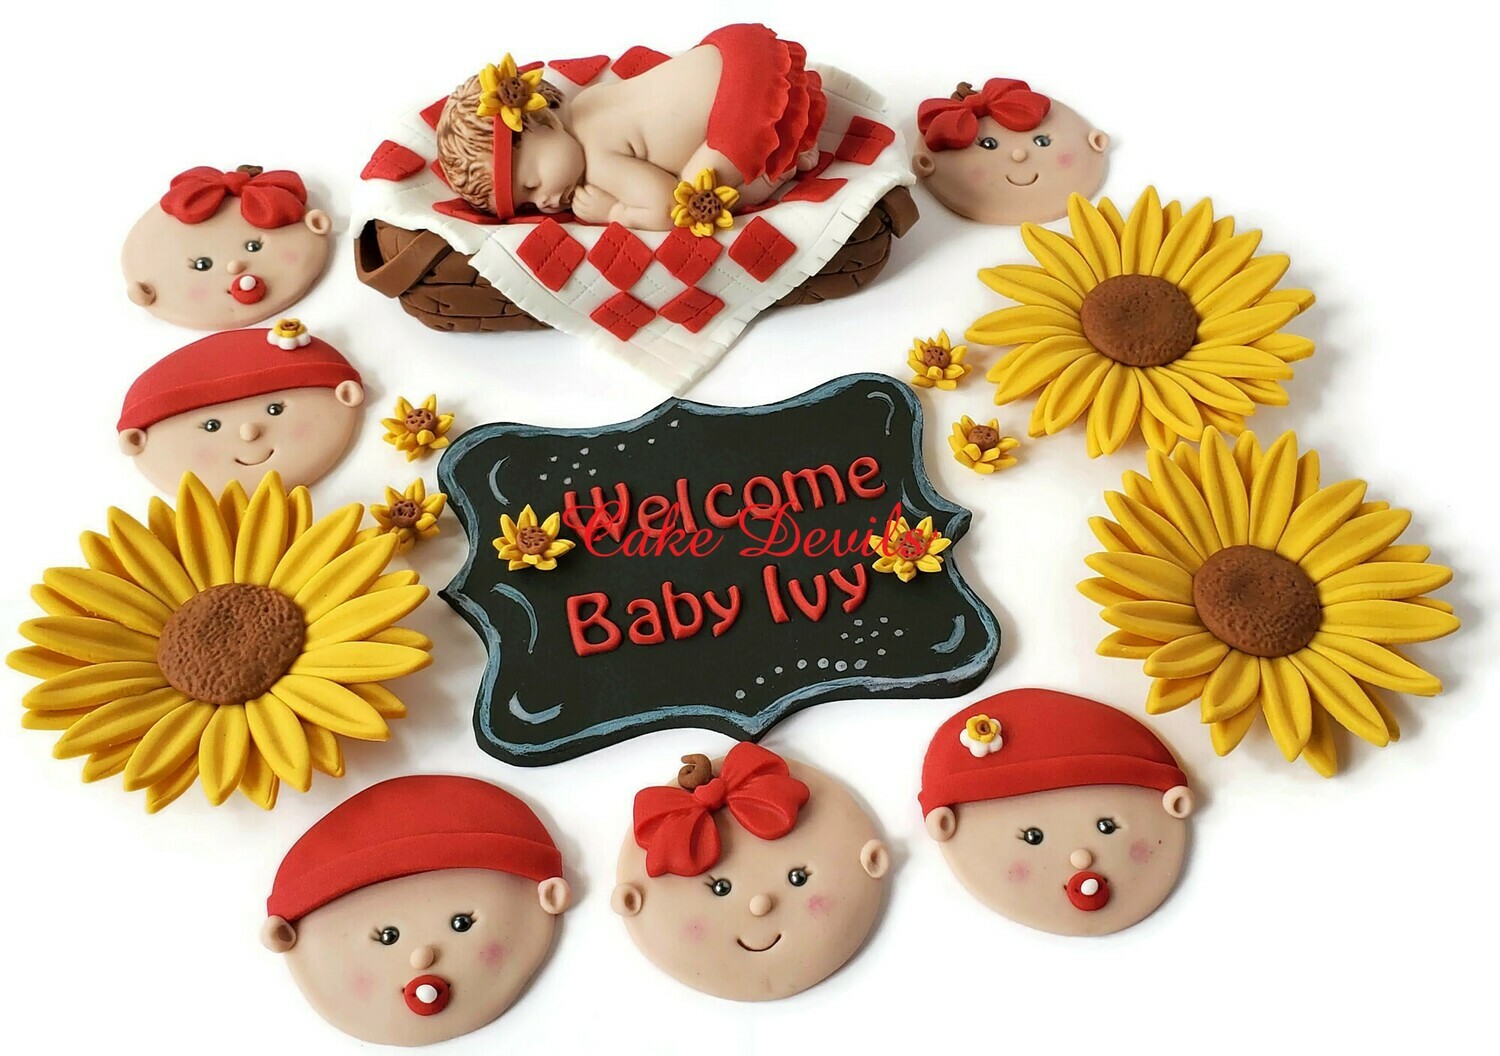 Picnic and Sunflower Baby Shower Cake Toppers and Baby Face Fondant Cupcake Toppers